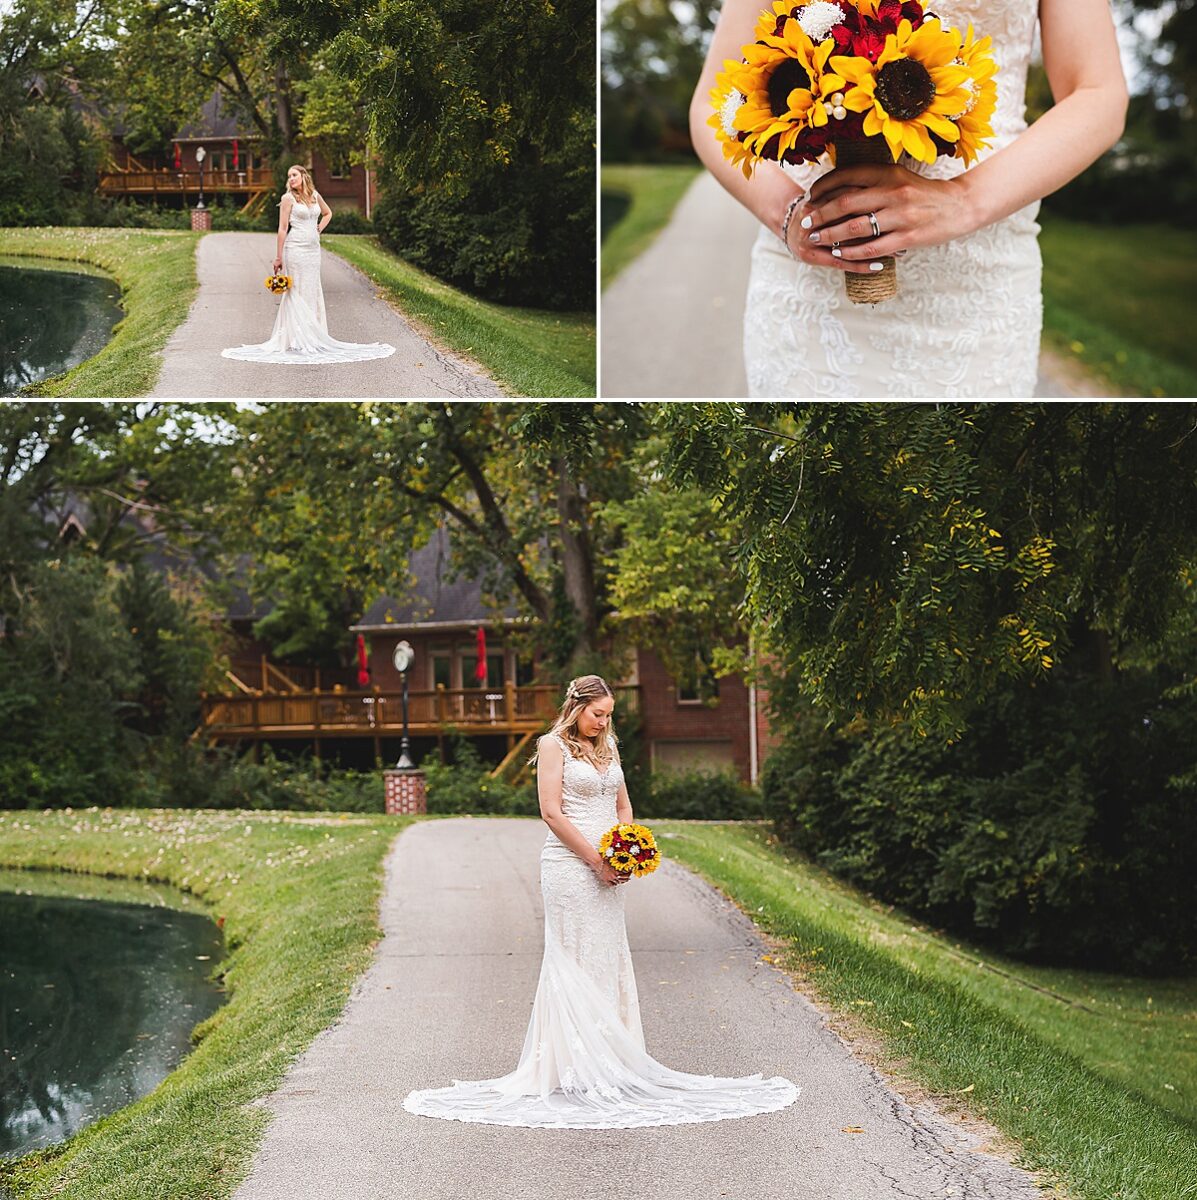 The Balmoral House Elopement | Indianapolis Elopement Photographer | casey and her camera